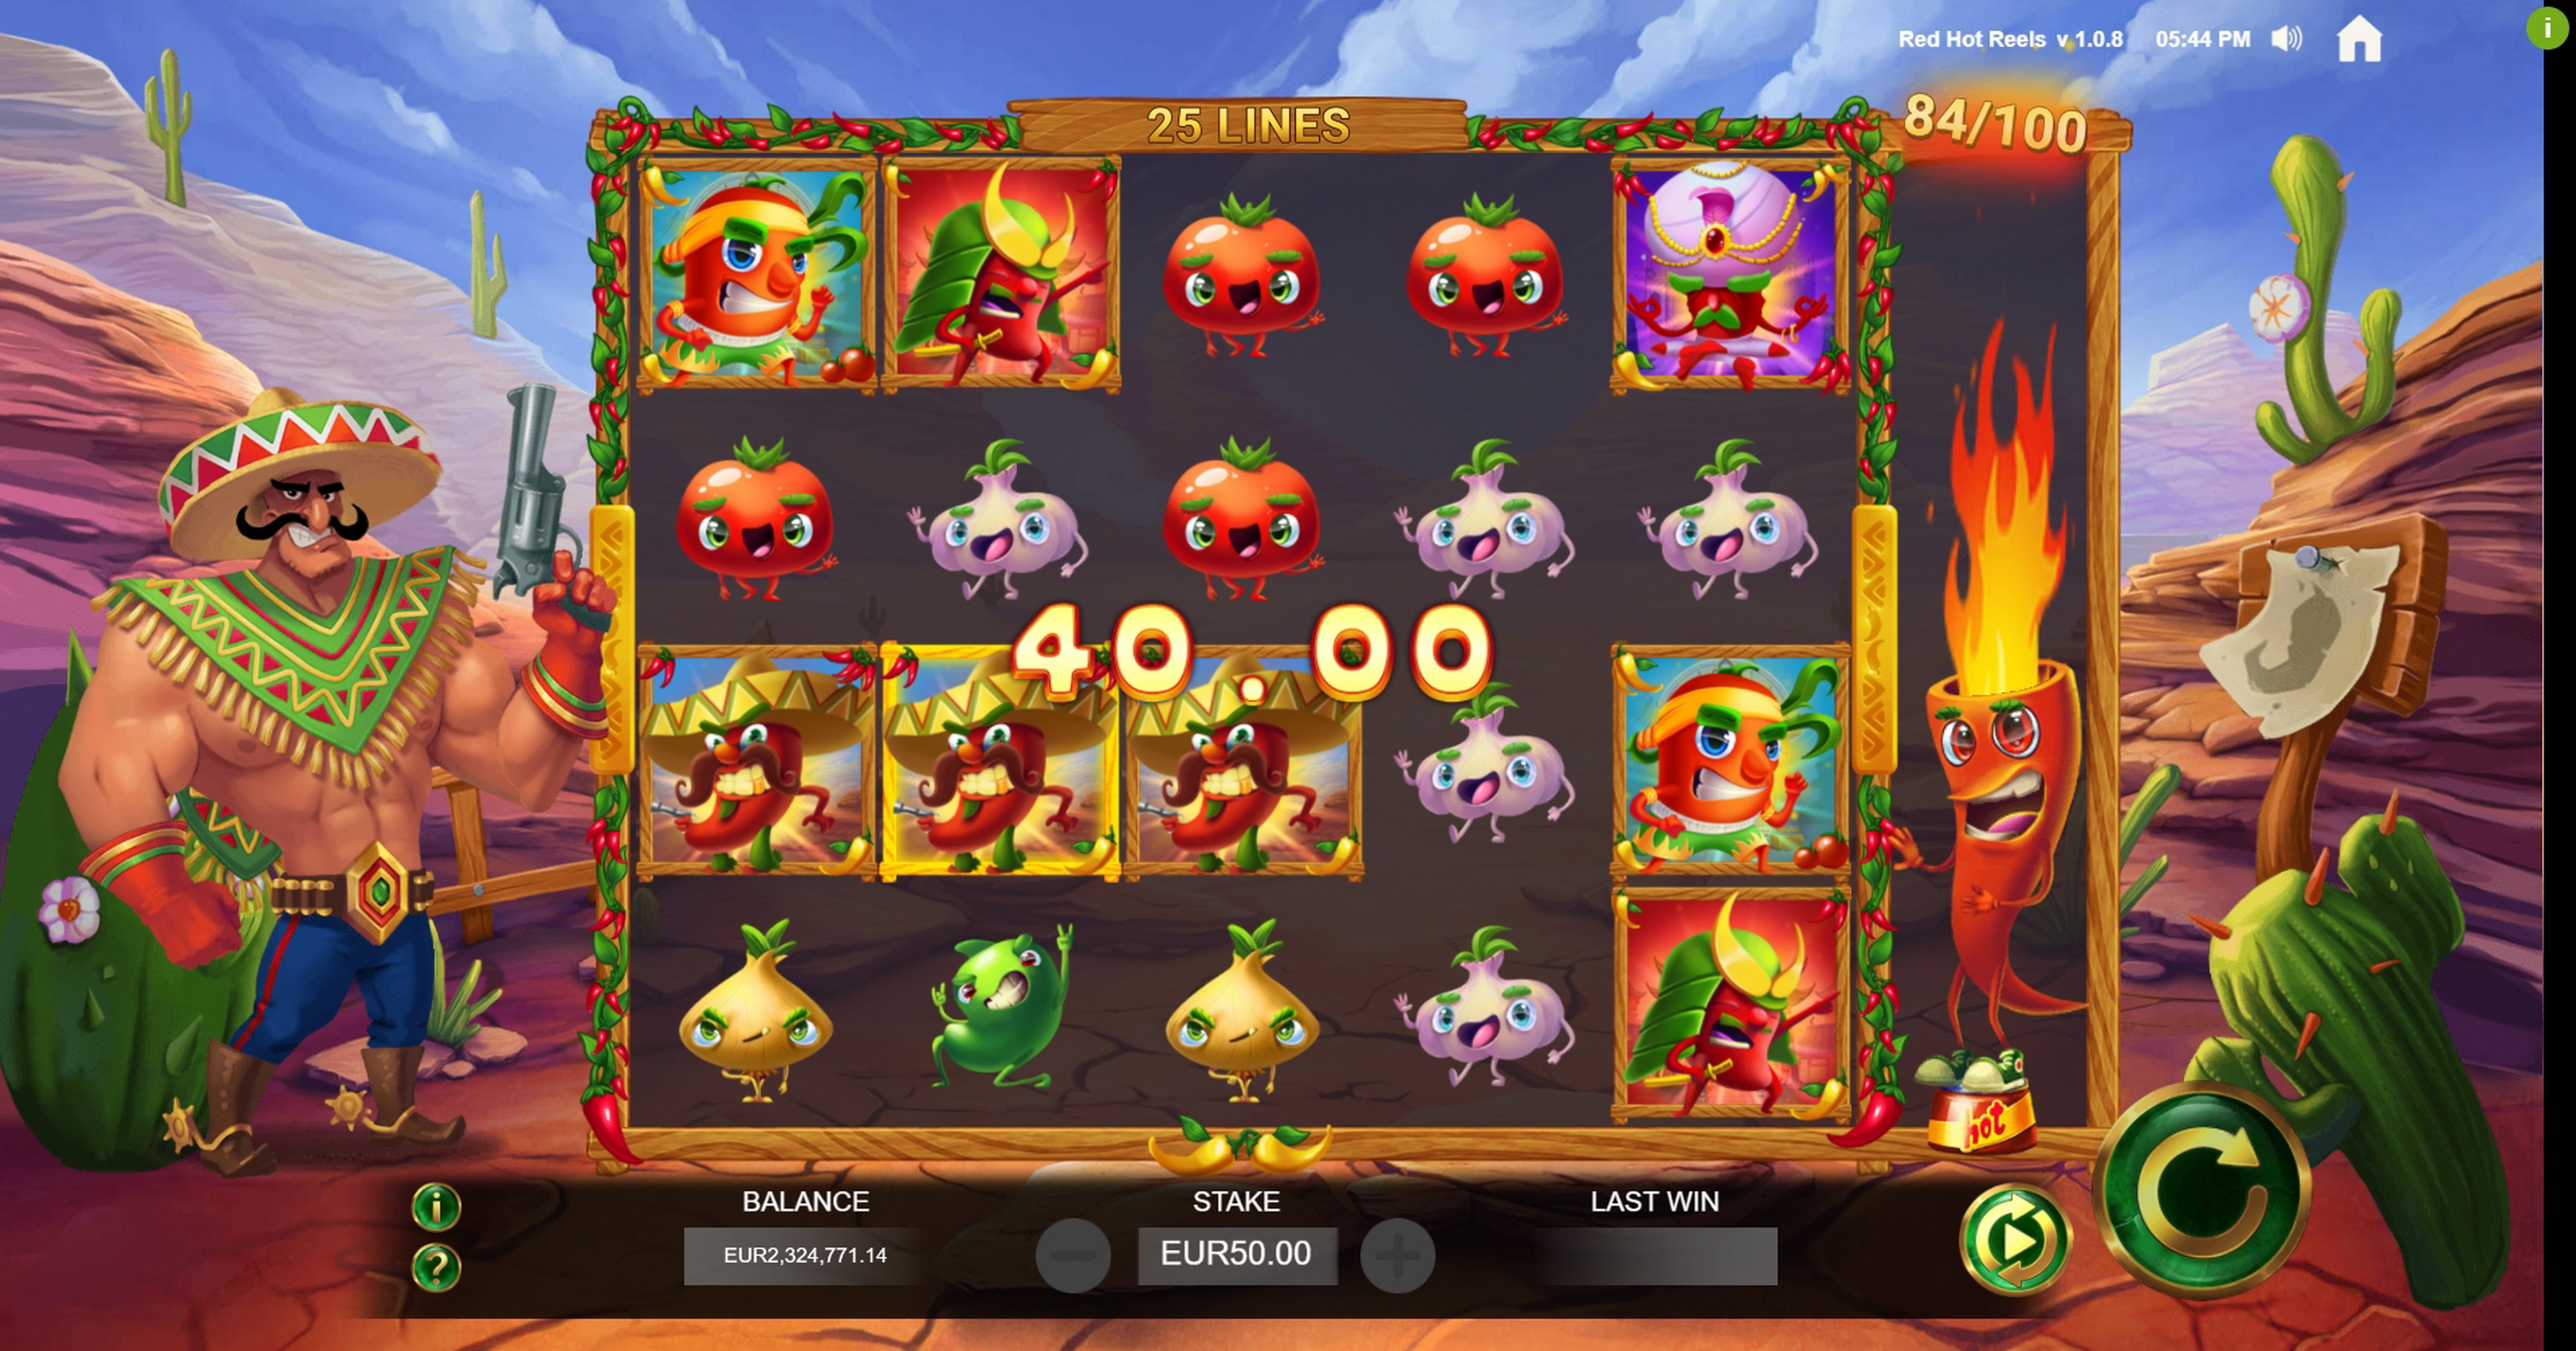 Win Money in Red Hot Reels Free Slot Game by Jade Rabbit Gaming